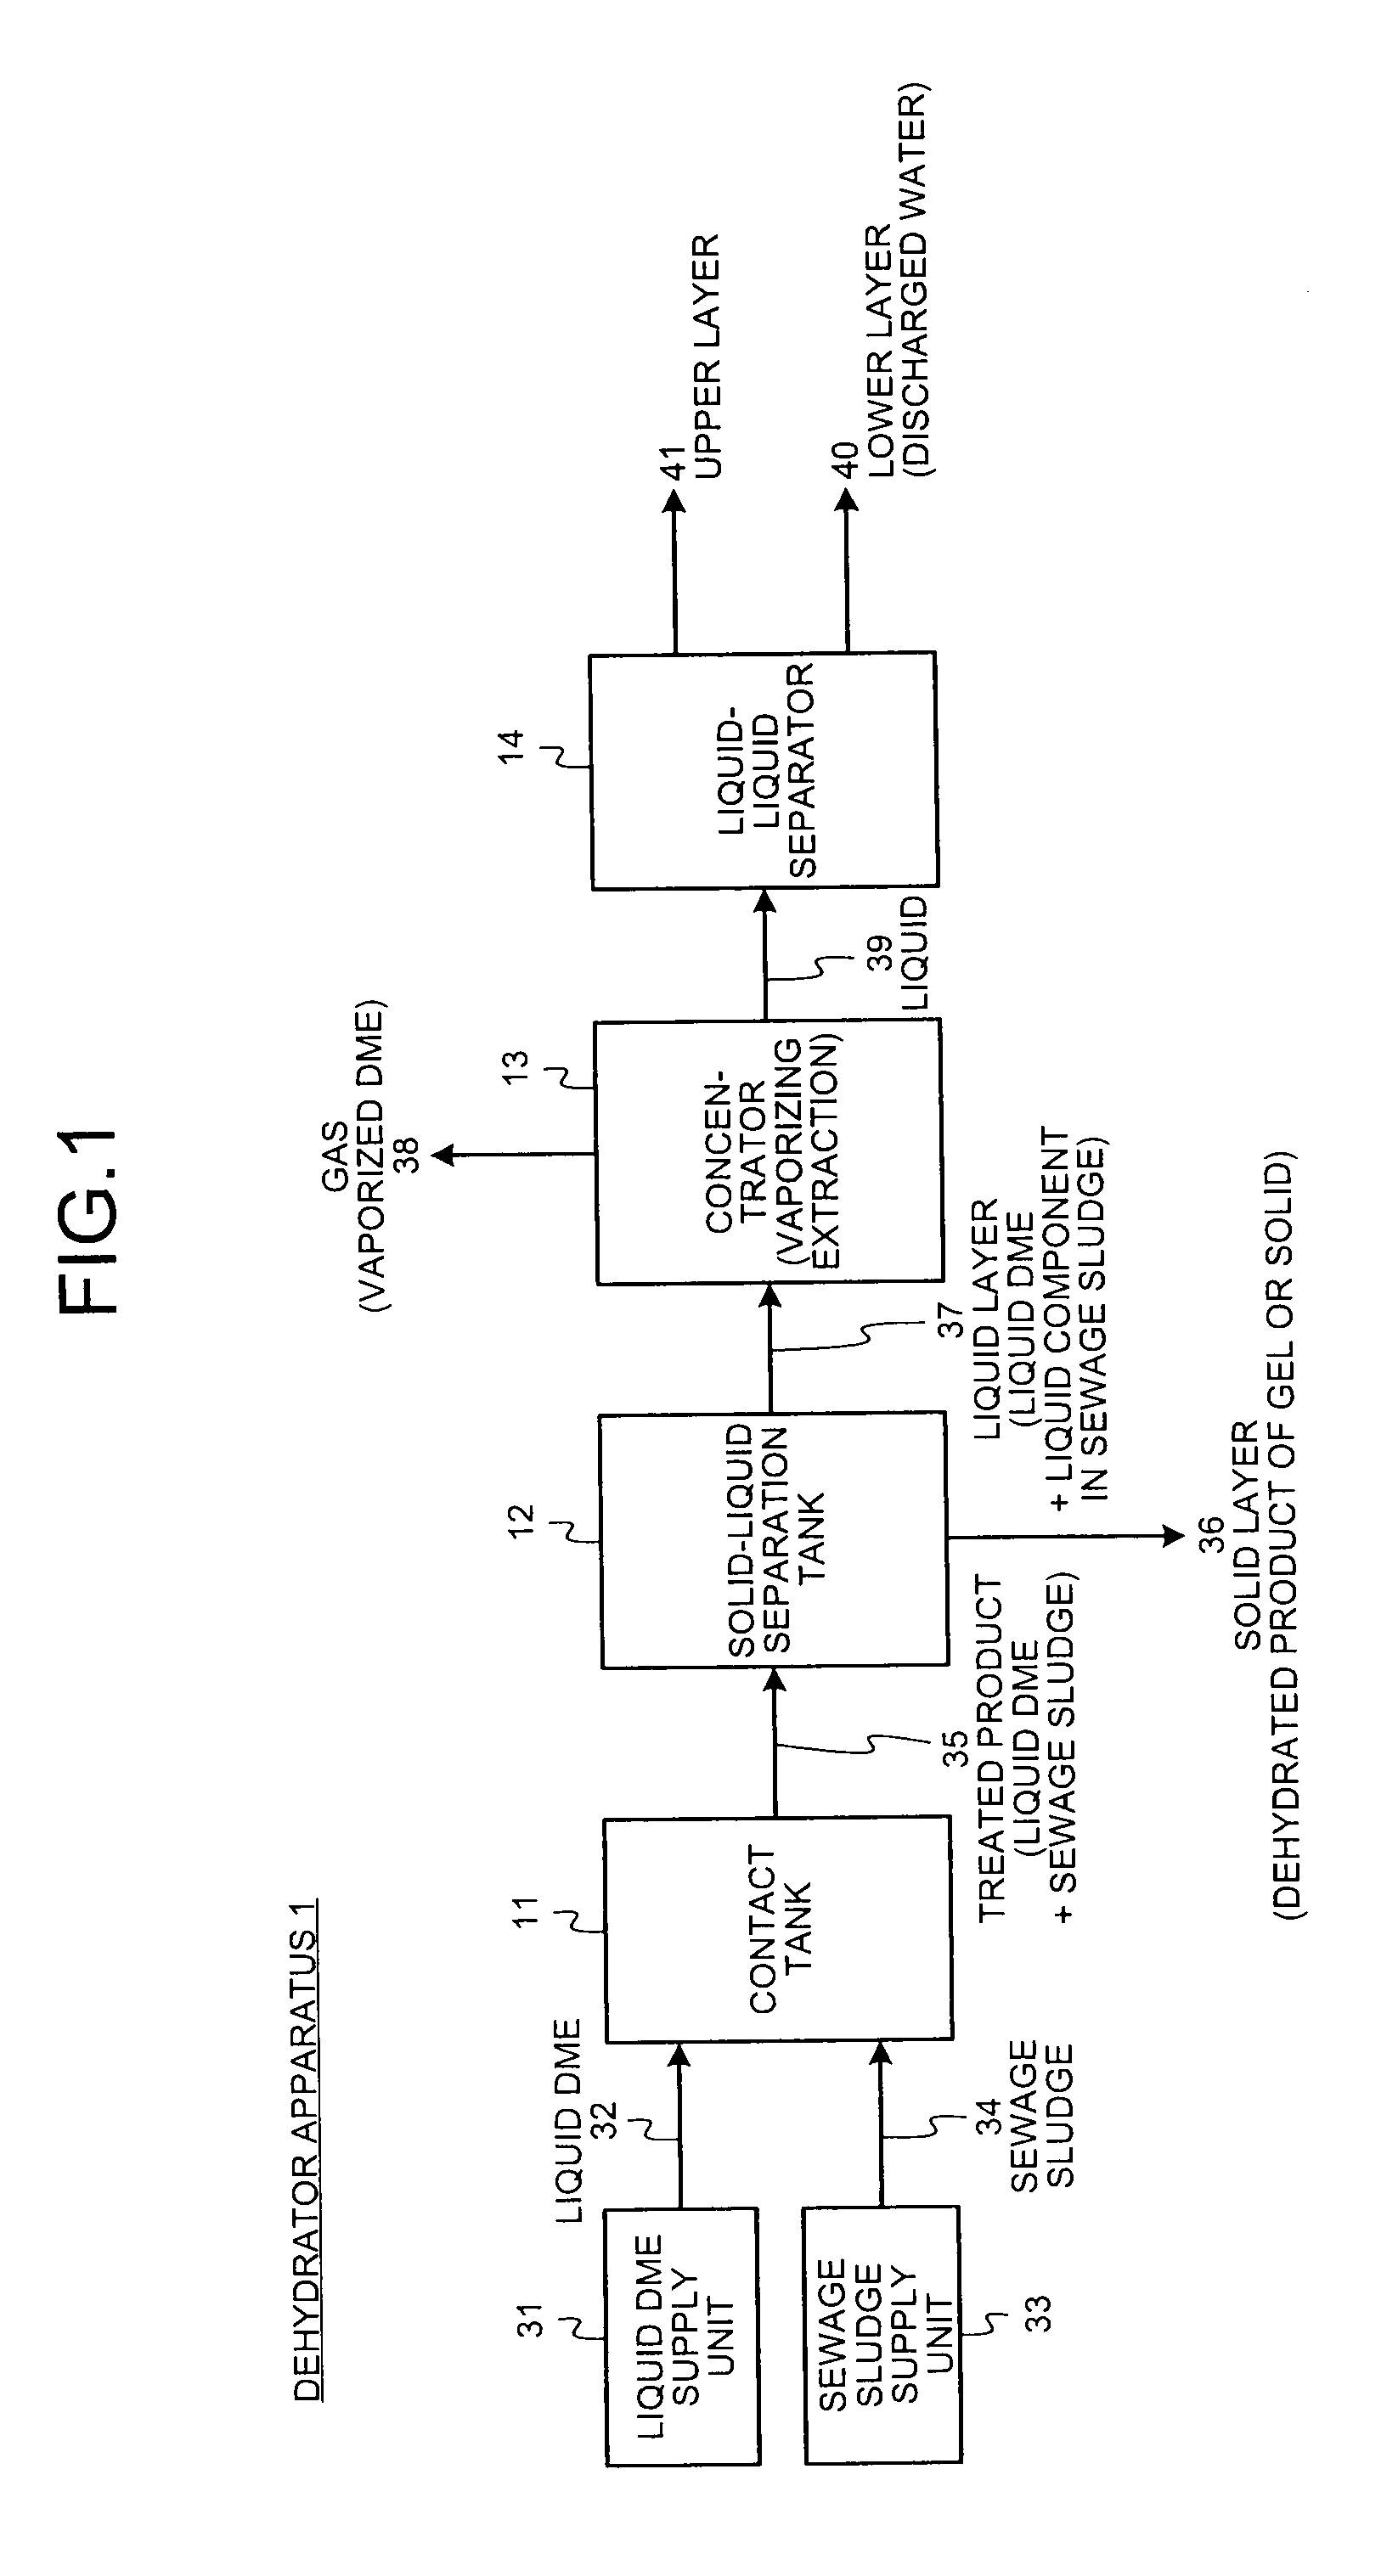 Method for treatment of water-containing material